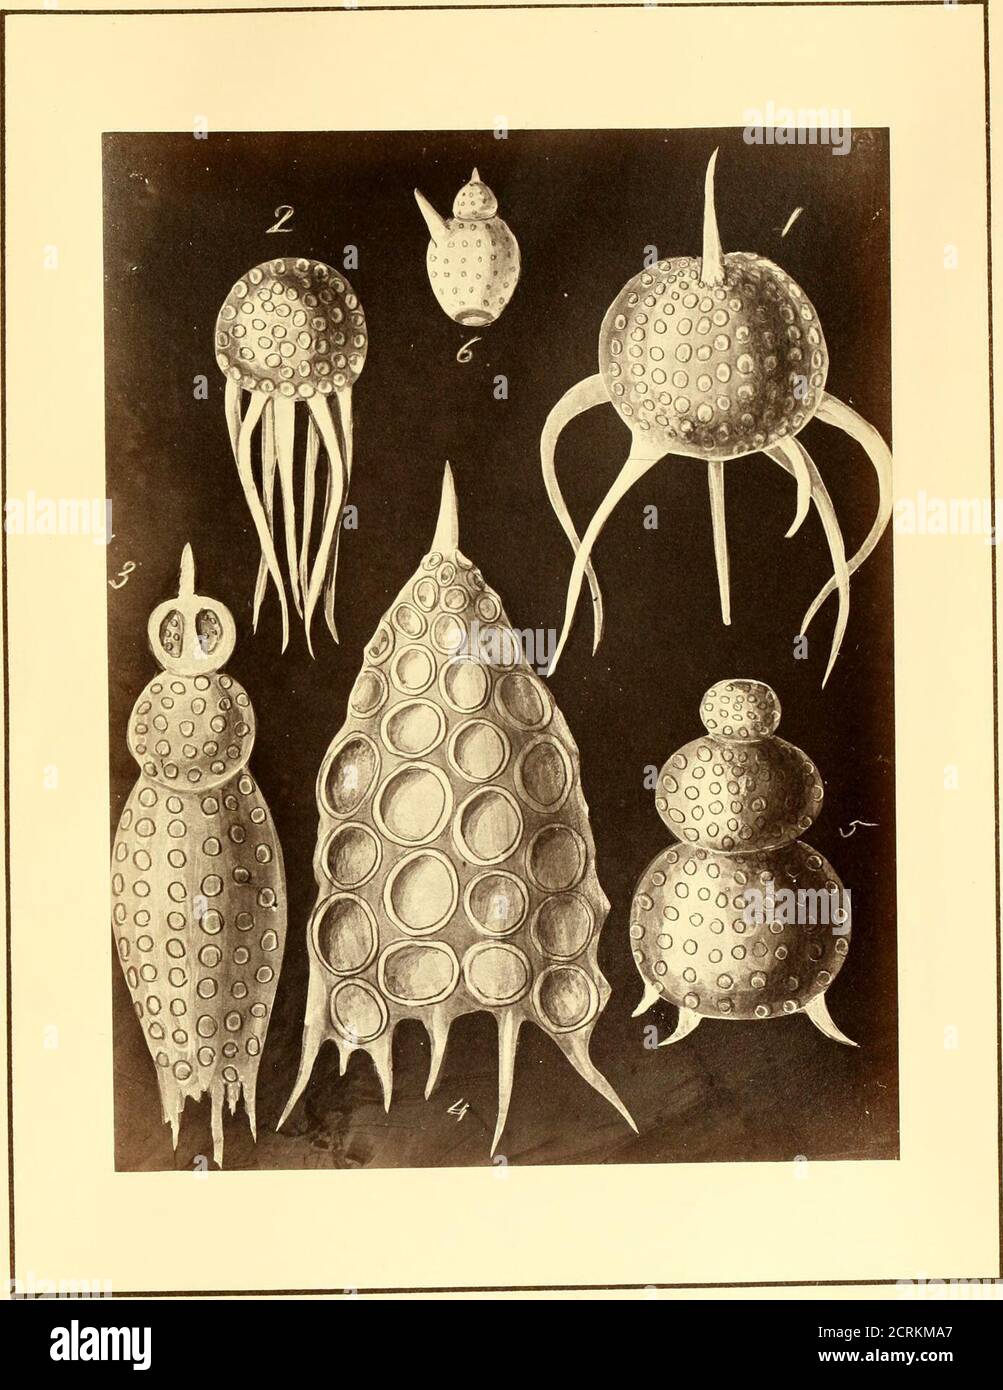 . Polycystins, figures of remarkable forms &c. in the Barbados chalk deposit (chiefly collected by Dr. Davy, and noticed in a lecture delivered to the Agricultural Society of Barbados, in July, 1846) . 03 n ;.1A USA PLATE IX. Fit). 1.—Petalosi^iris foveolata—var. Ehr., (INIikrogeologie, Taf. XXXIV,14.) .0075 high, spiues iiiduded, .0031 dia. of ball. 2.—The same without the central spike through it. 3.—A Podocyrtis (?) of Ehreuberg. 4.—A Podocyrtis (?) nearly akin to Podocyrtis Mglea. (JVIik. Taf.XXXV. B. IS); measures .0106 high, .0052 broad. 5.—A Podocyrtis (?) without the usual surmountmg s Stock Photo